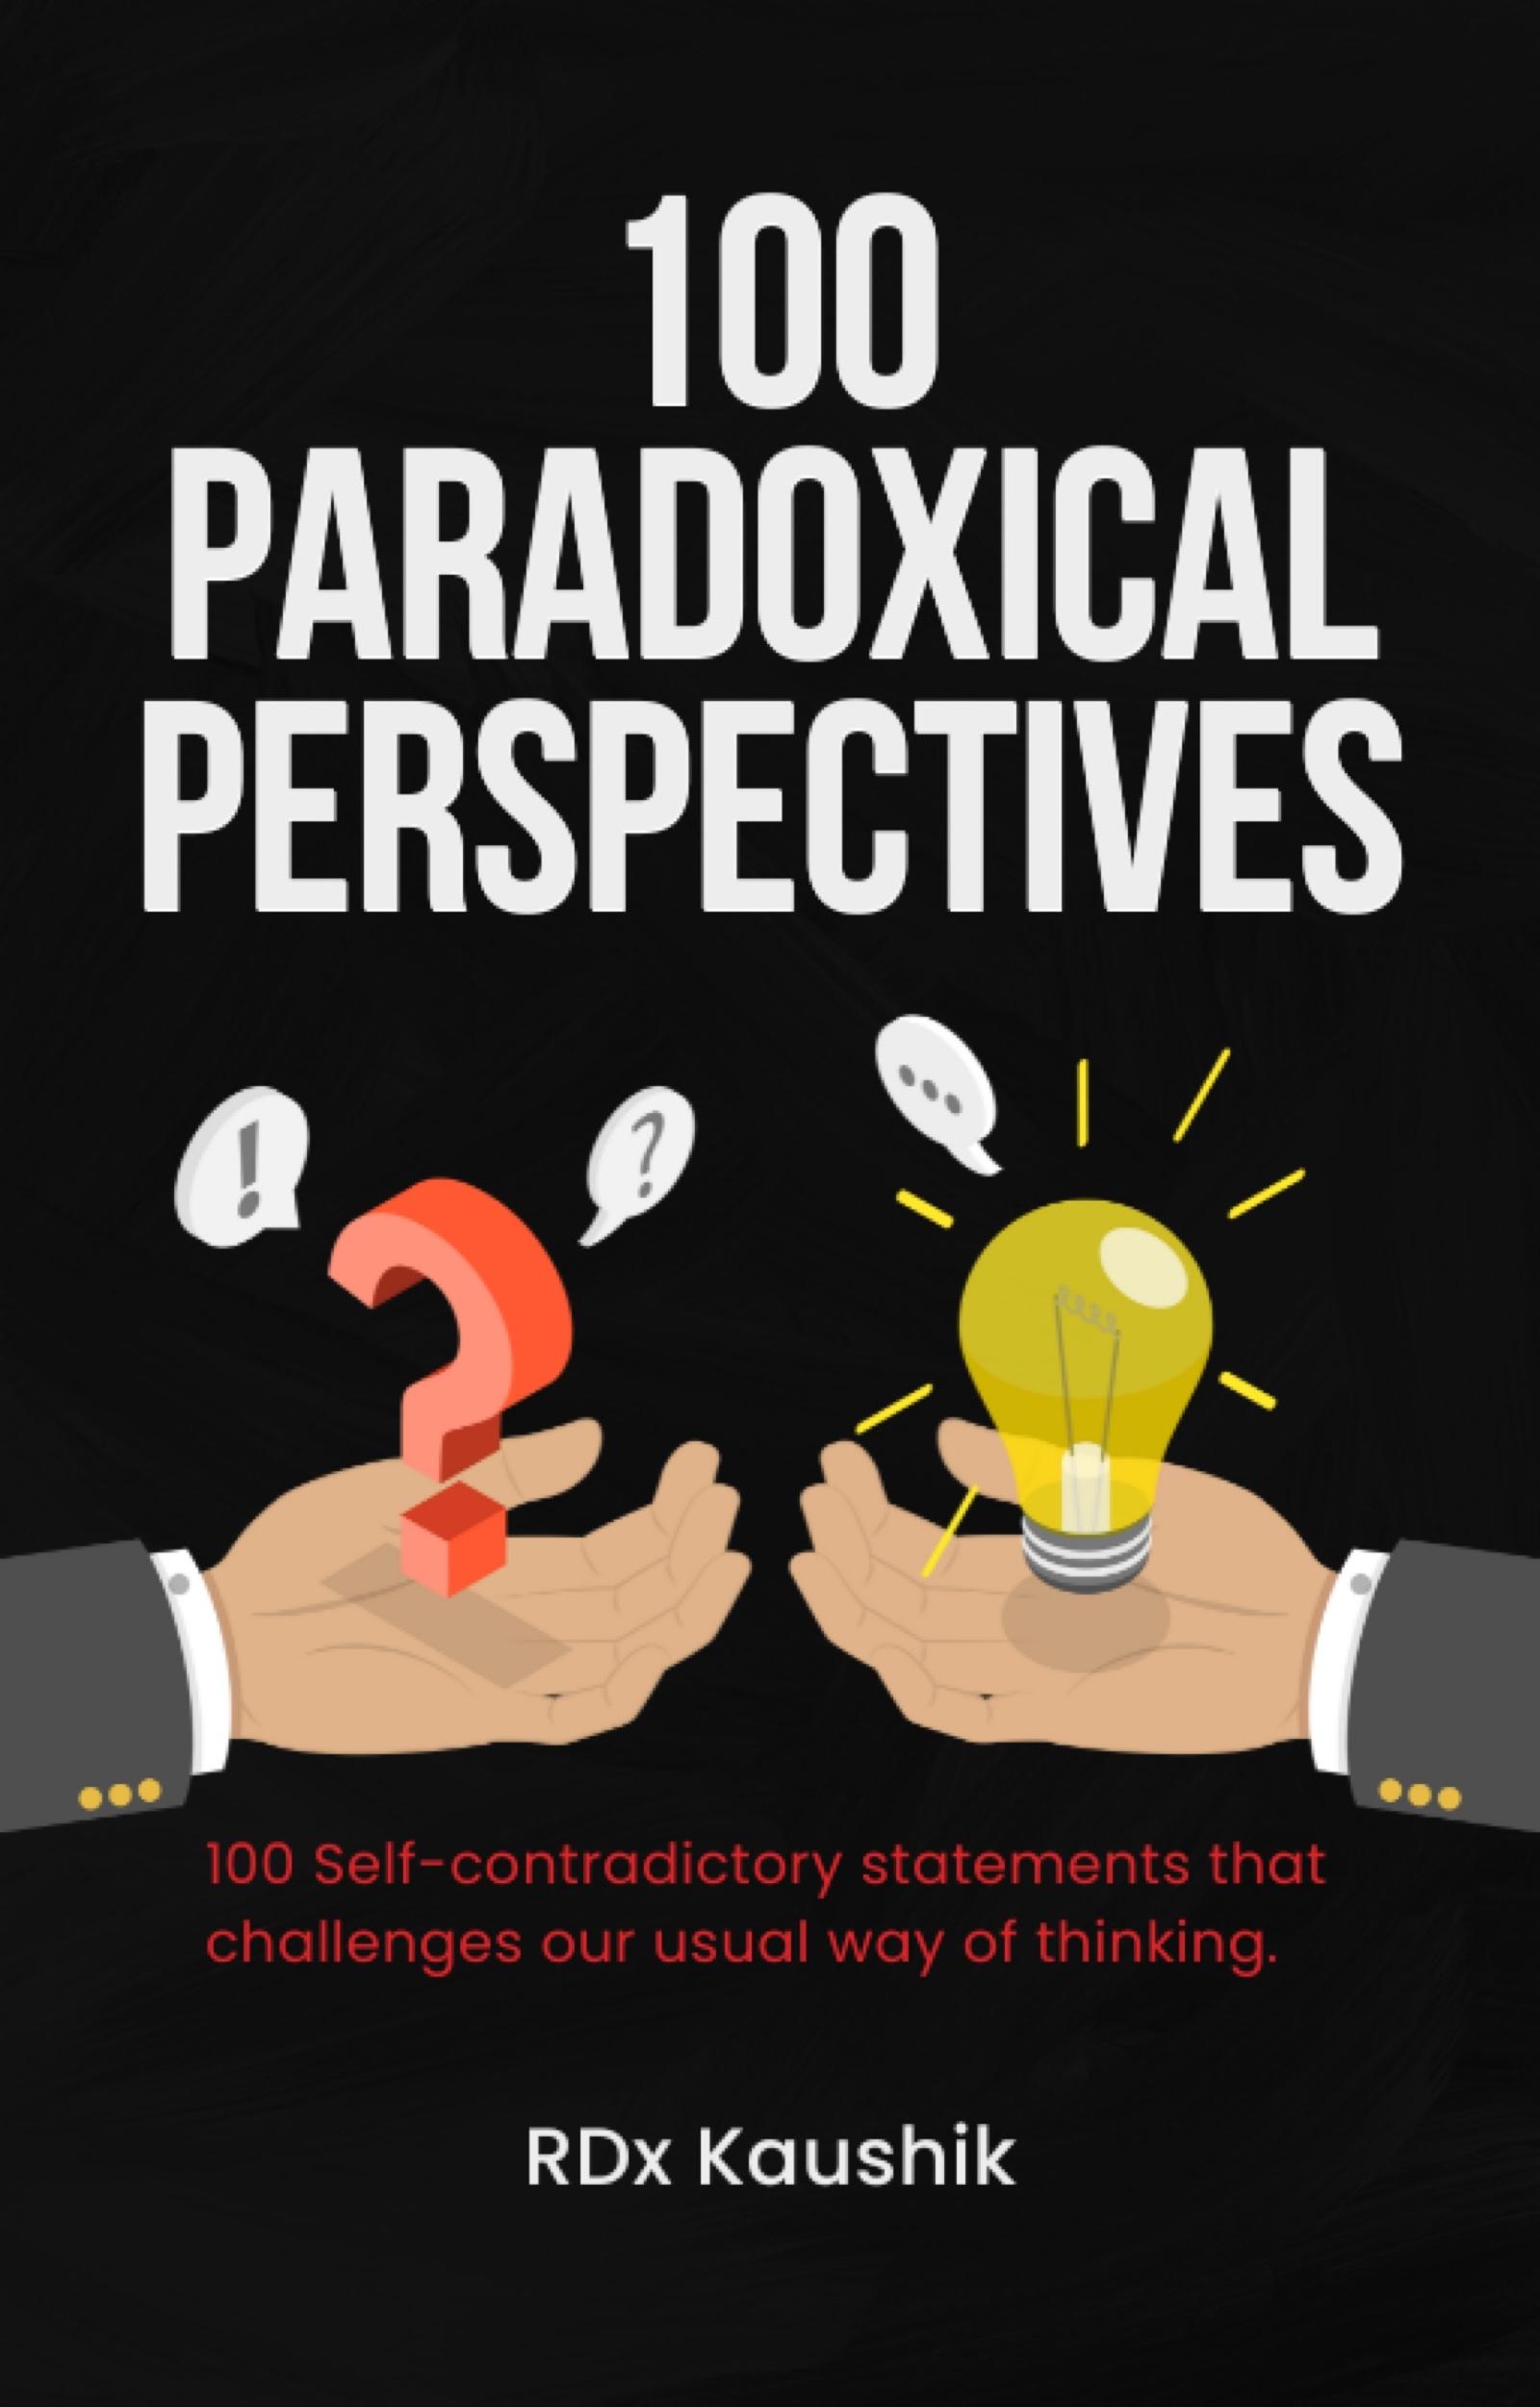 100 Paradoxical Perspectives